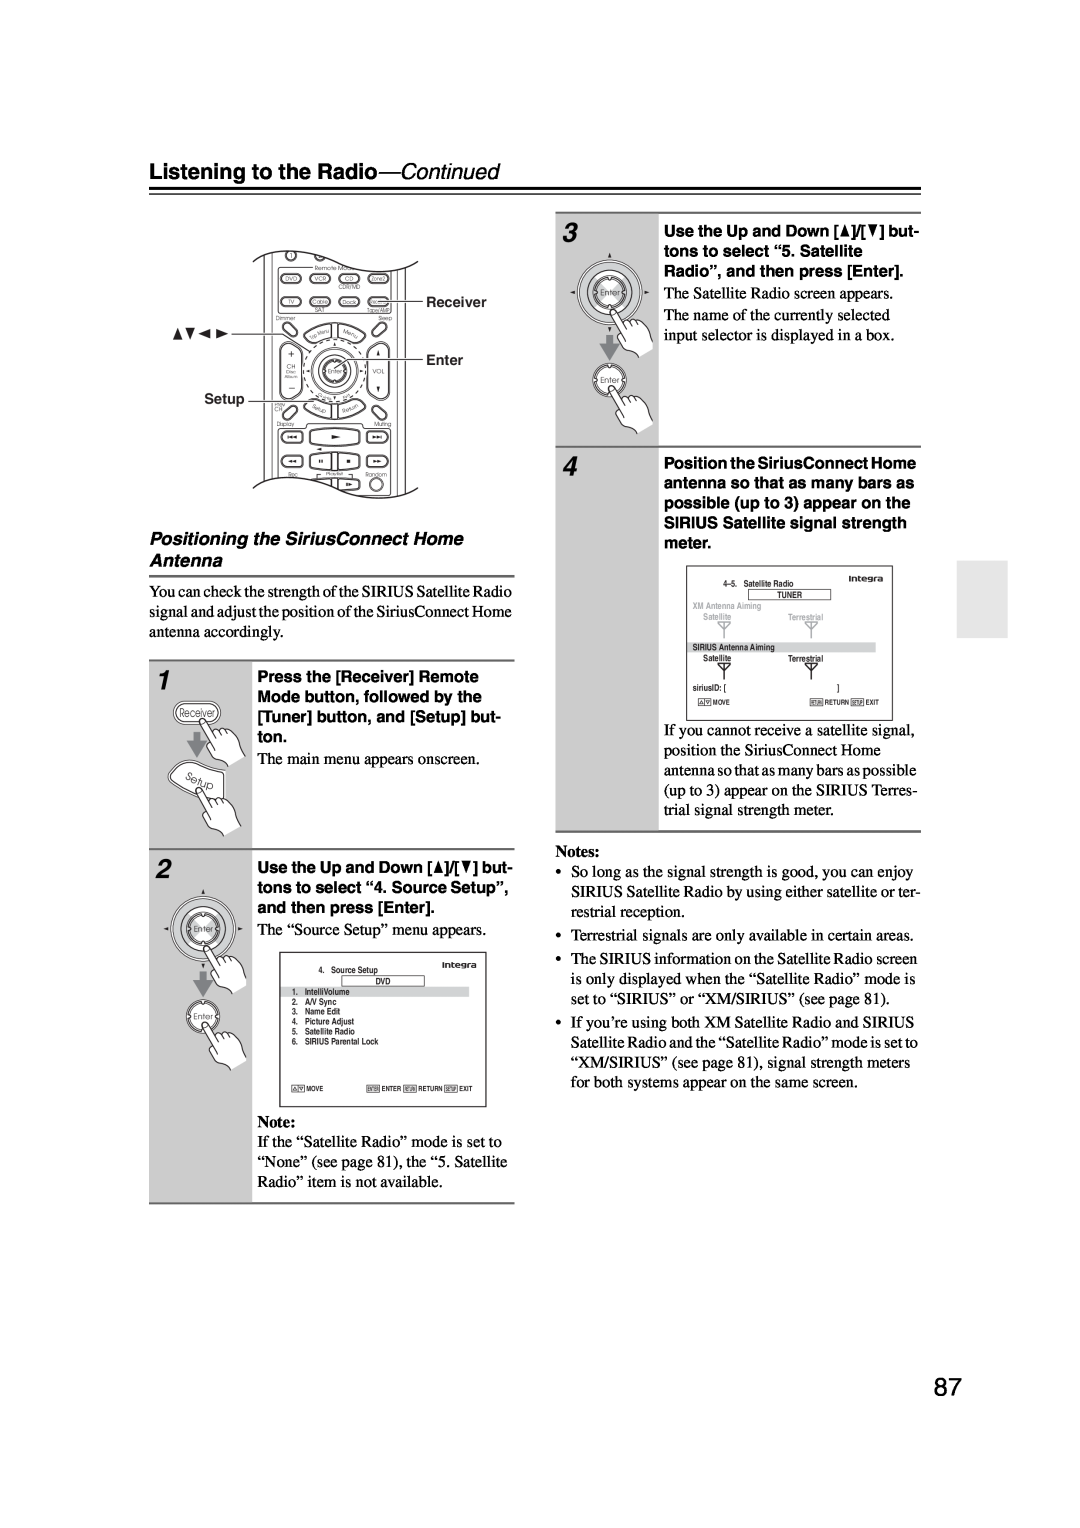 Integra DHC-9.9 instruction manual Positioning the SiriusConnect Home Antenna, Listening to the Radio—Continued, Notes 